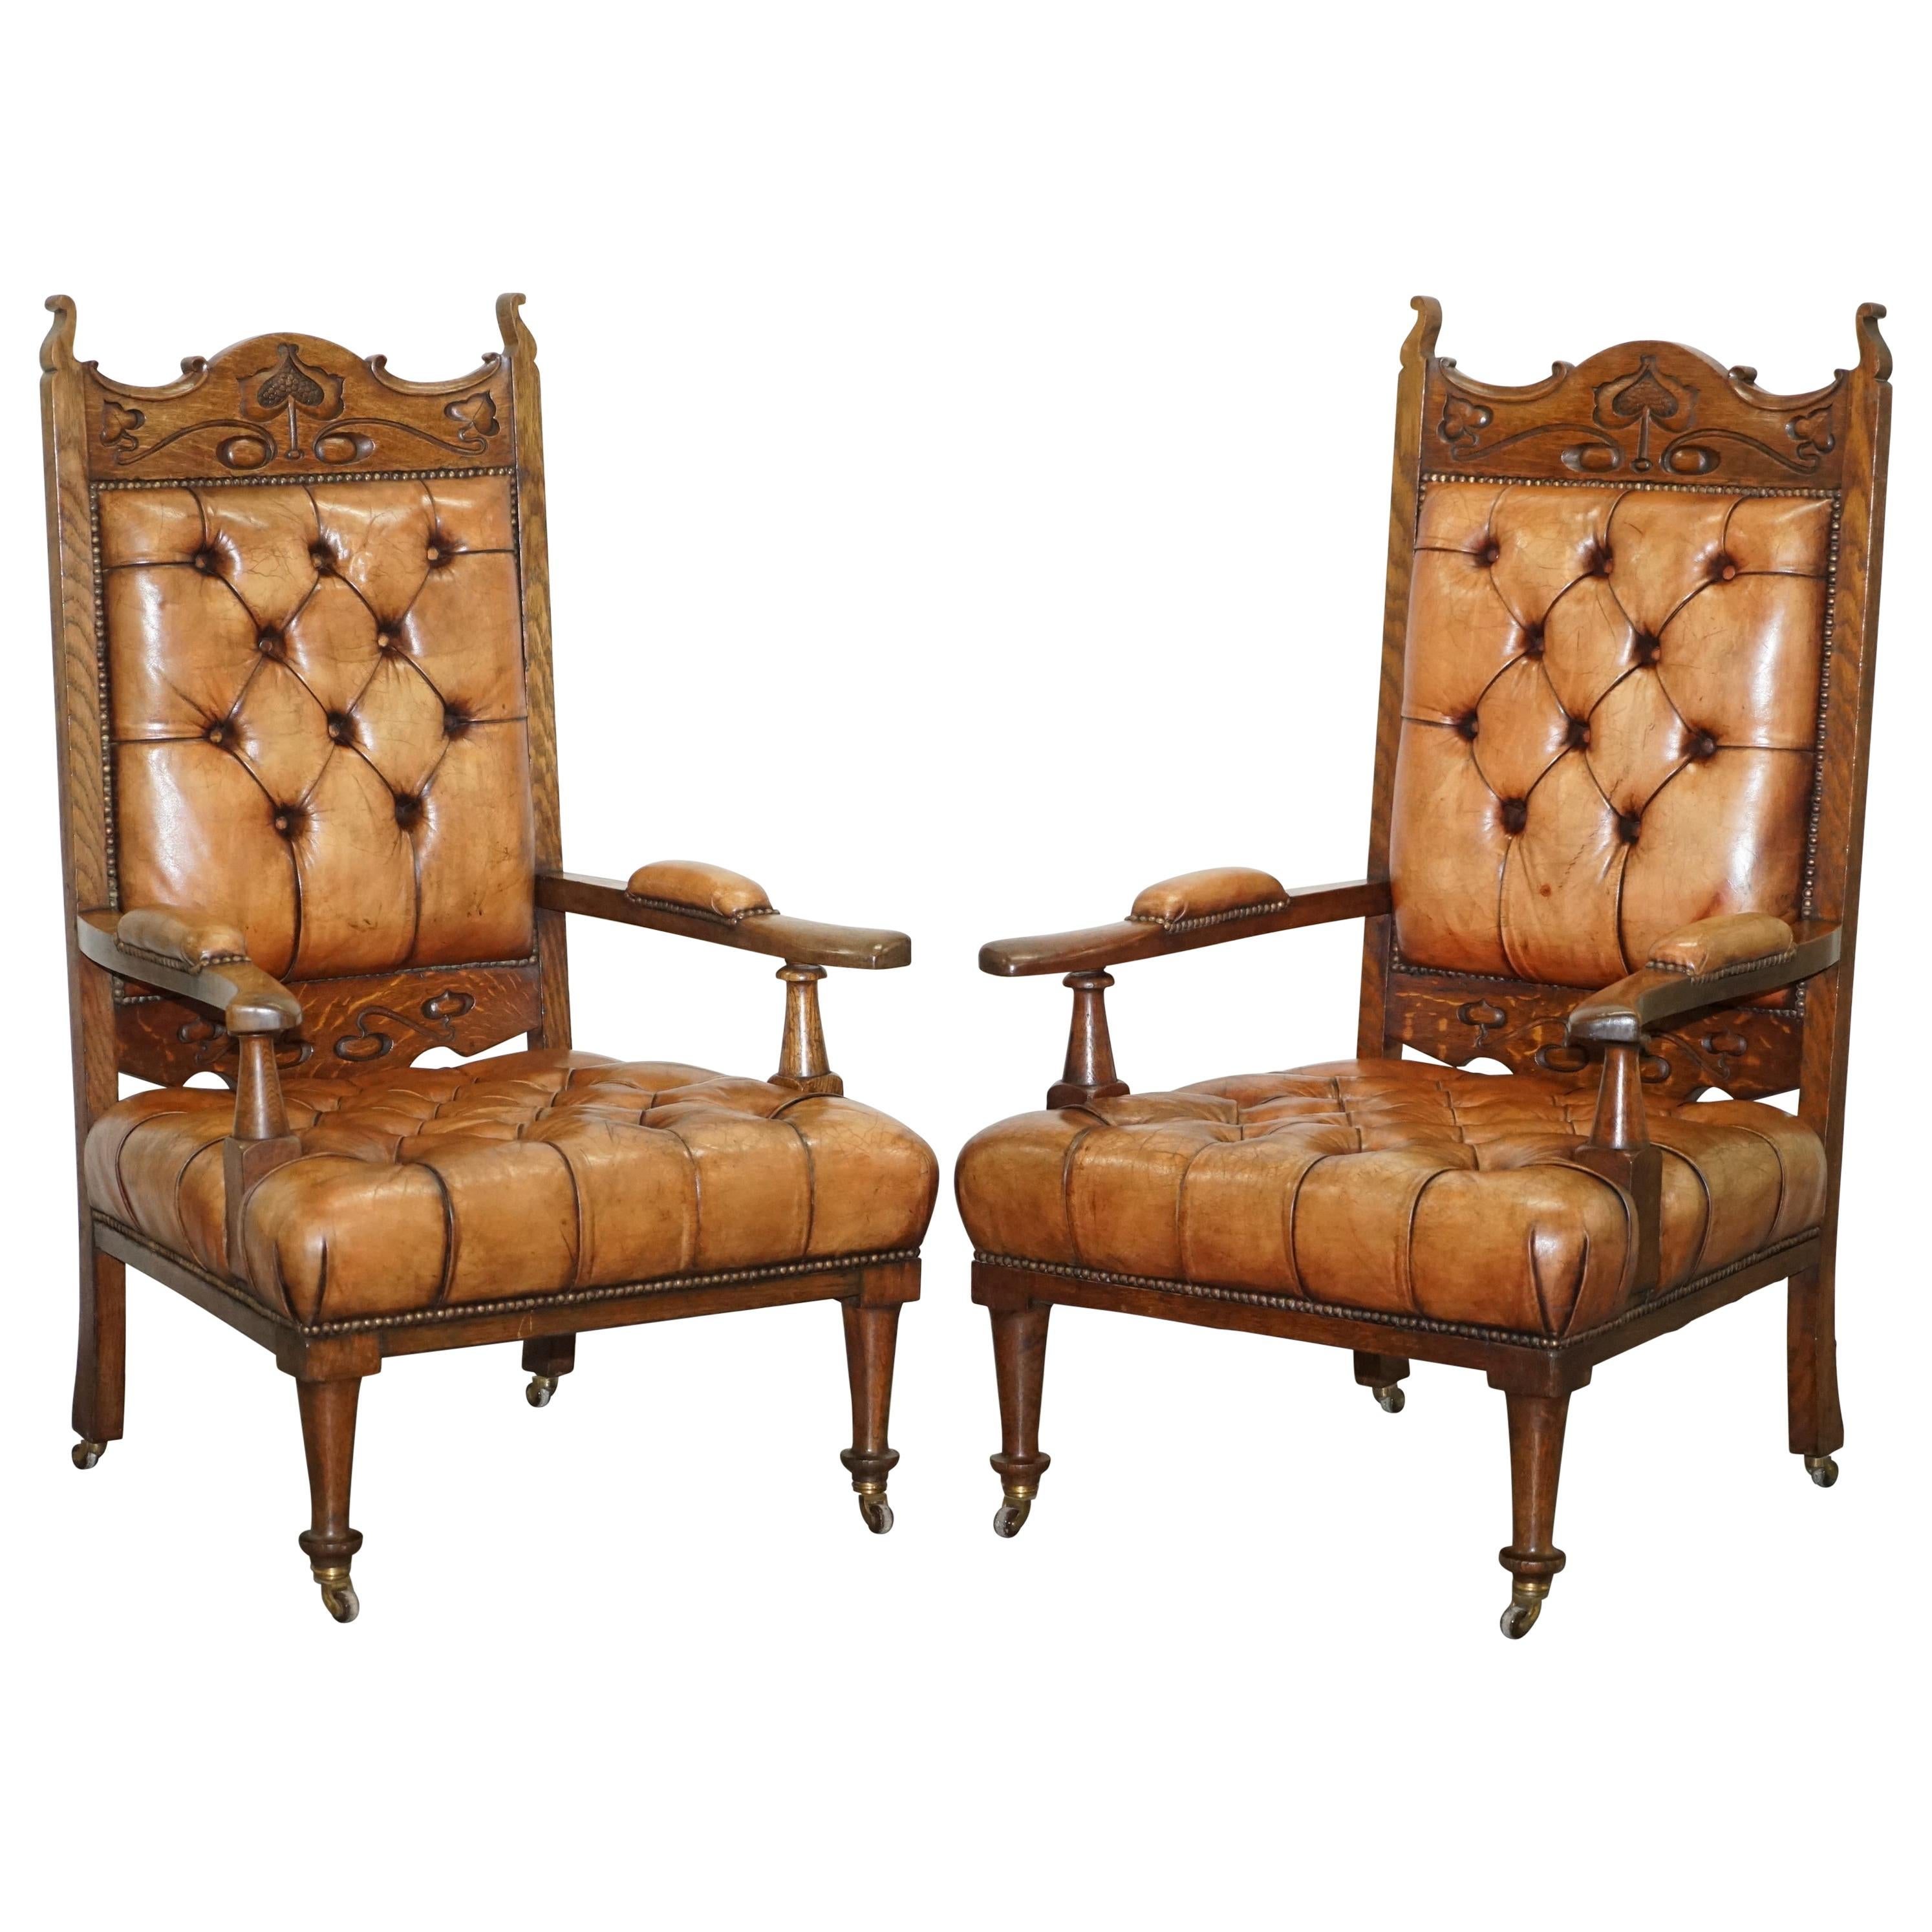 Pair of Libertys London Style Art Nouveau Chesterfield Brown Leather Armchairs